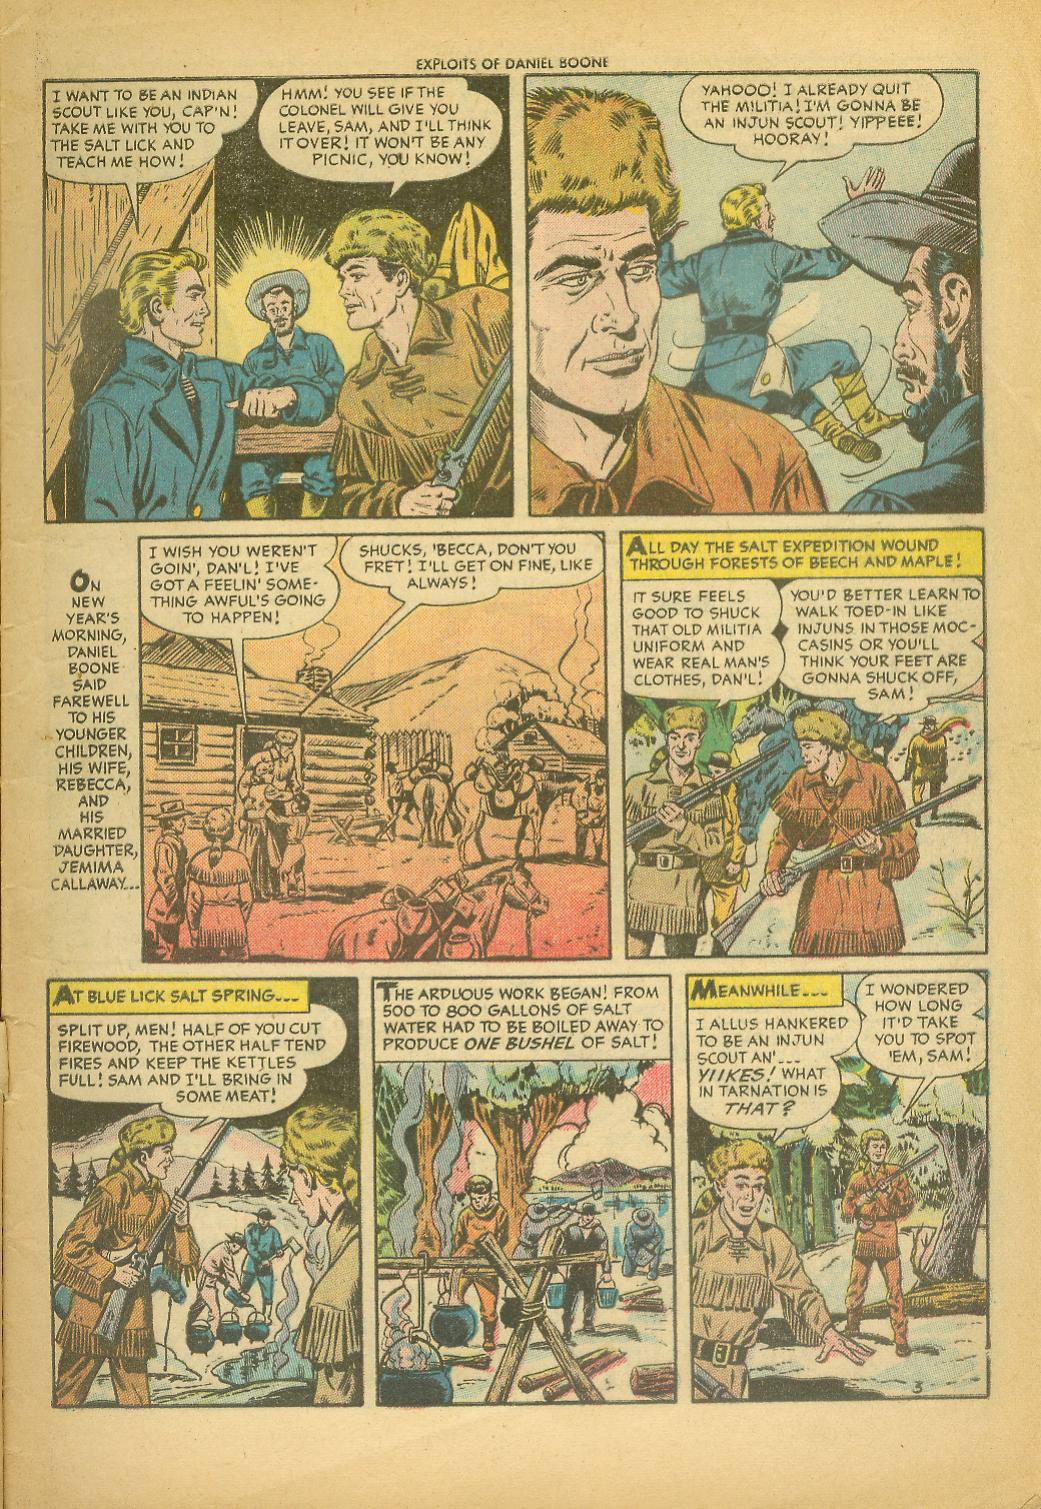 Read online Exploits of Daniel Boone comic -  Issue #1 - 5